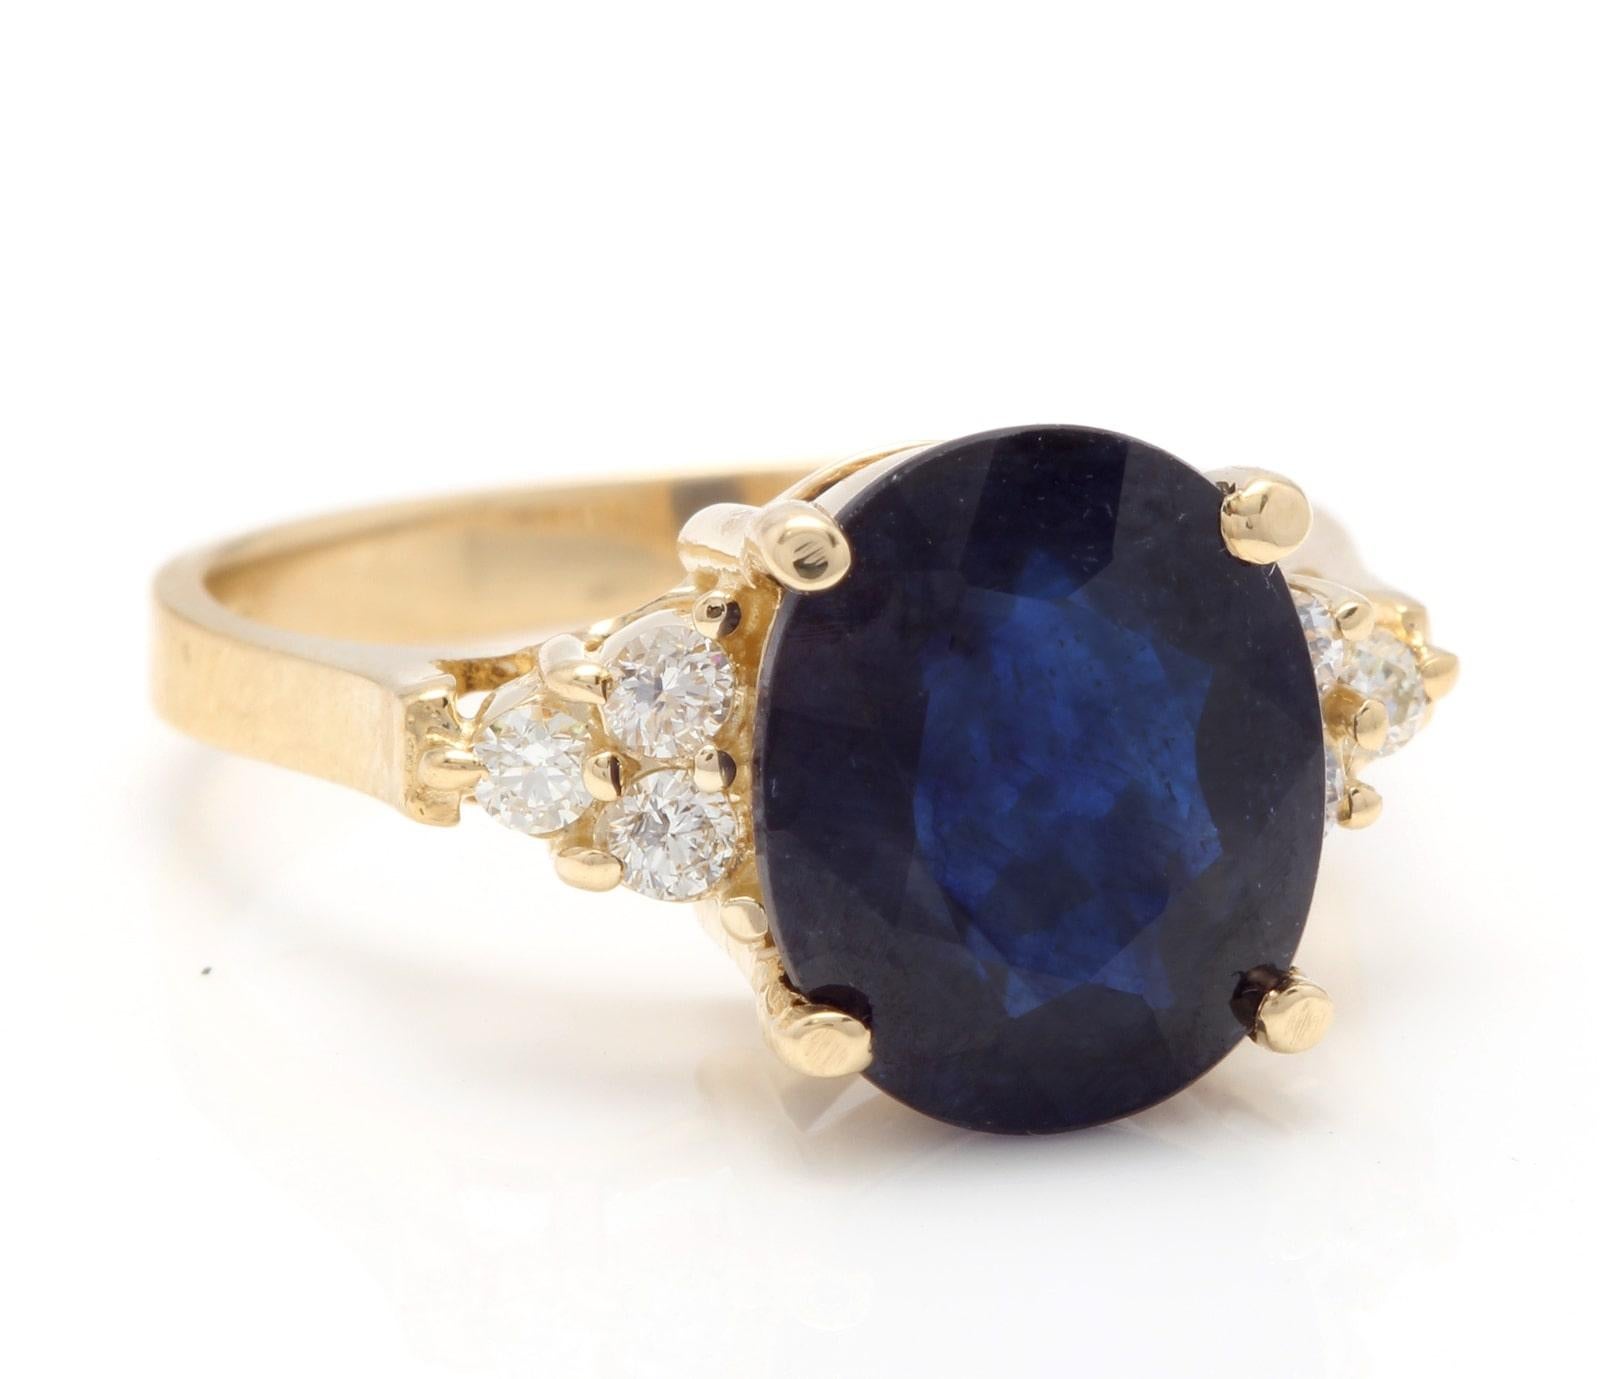 4.45 Carats Exquisite Natural Blue Sapphire and Diamond 14K Solid Yellow Gold Ring

Suggested Replacement Value $4,500.00

Total Natural Blue Sapphire Weights: Approx. 4.20 Carats 

Sapphire Measures: 10.00 x 8.00mm

Sapphire Treatment: